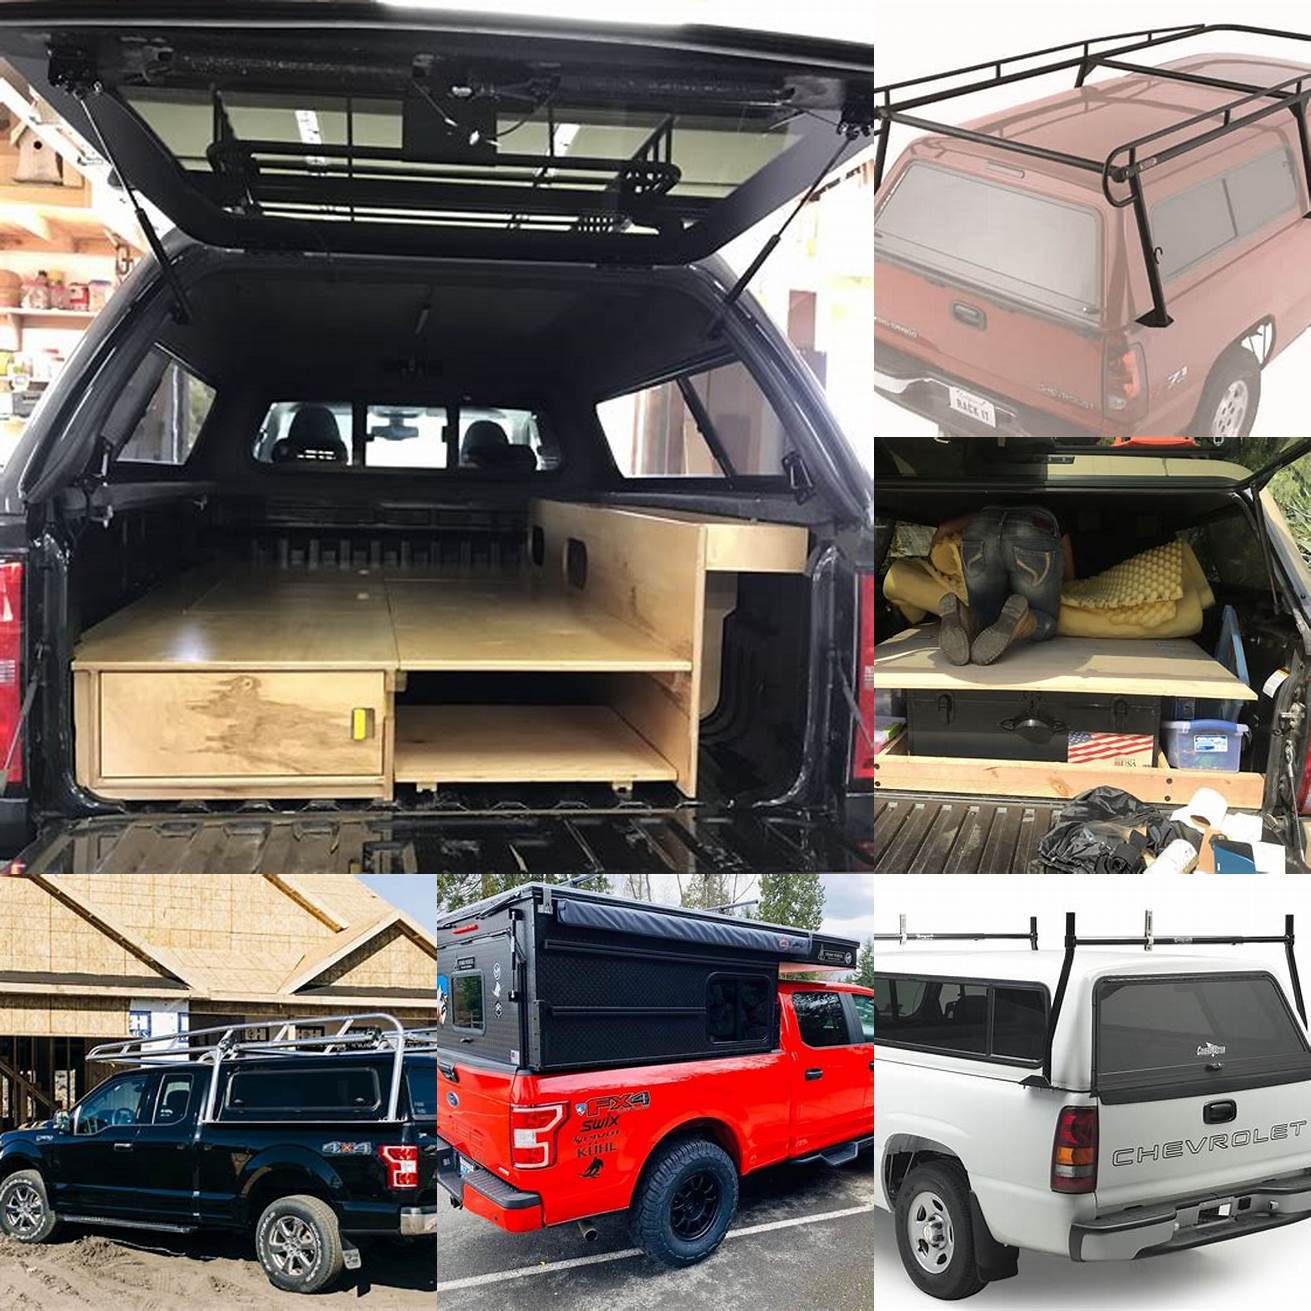 Truck with hardtop camper shell and built-in storage racks